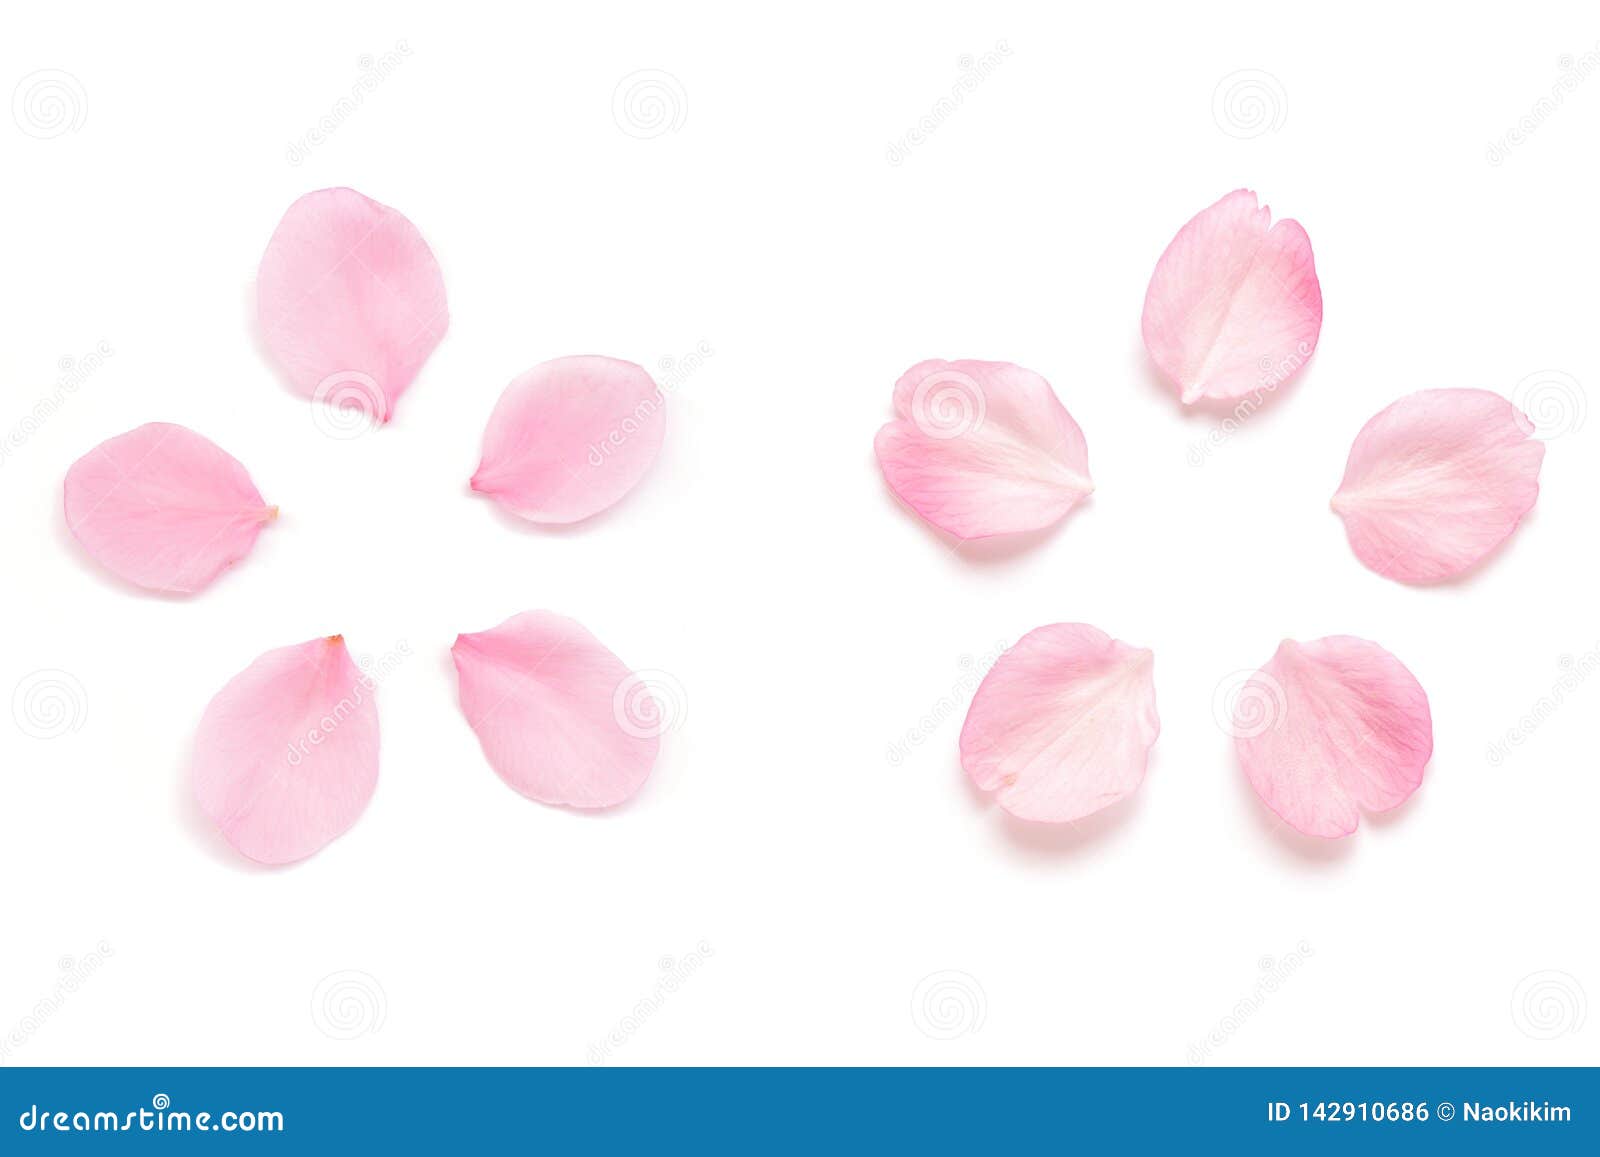 japanese pink cherry blossom petal  on white background